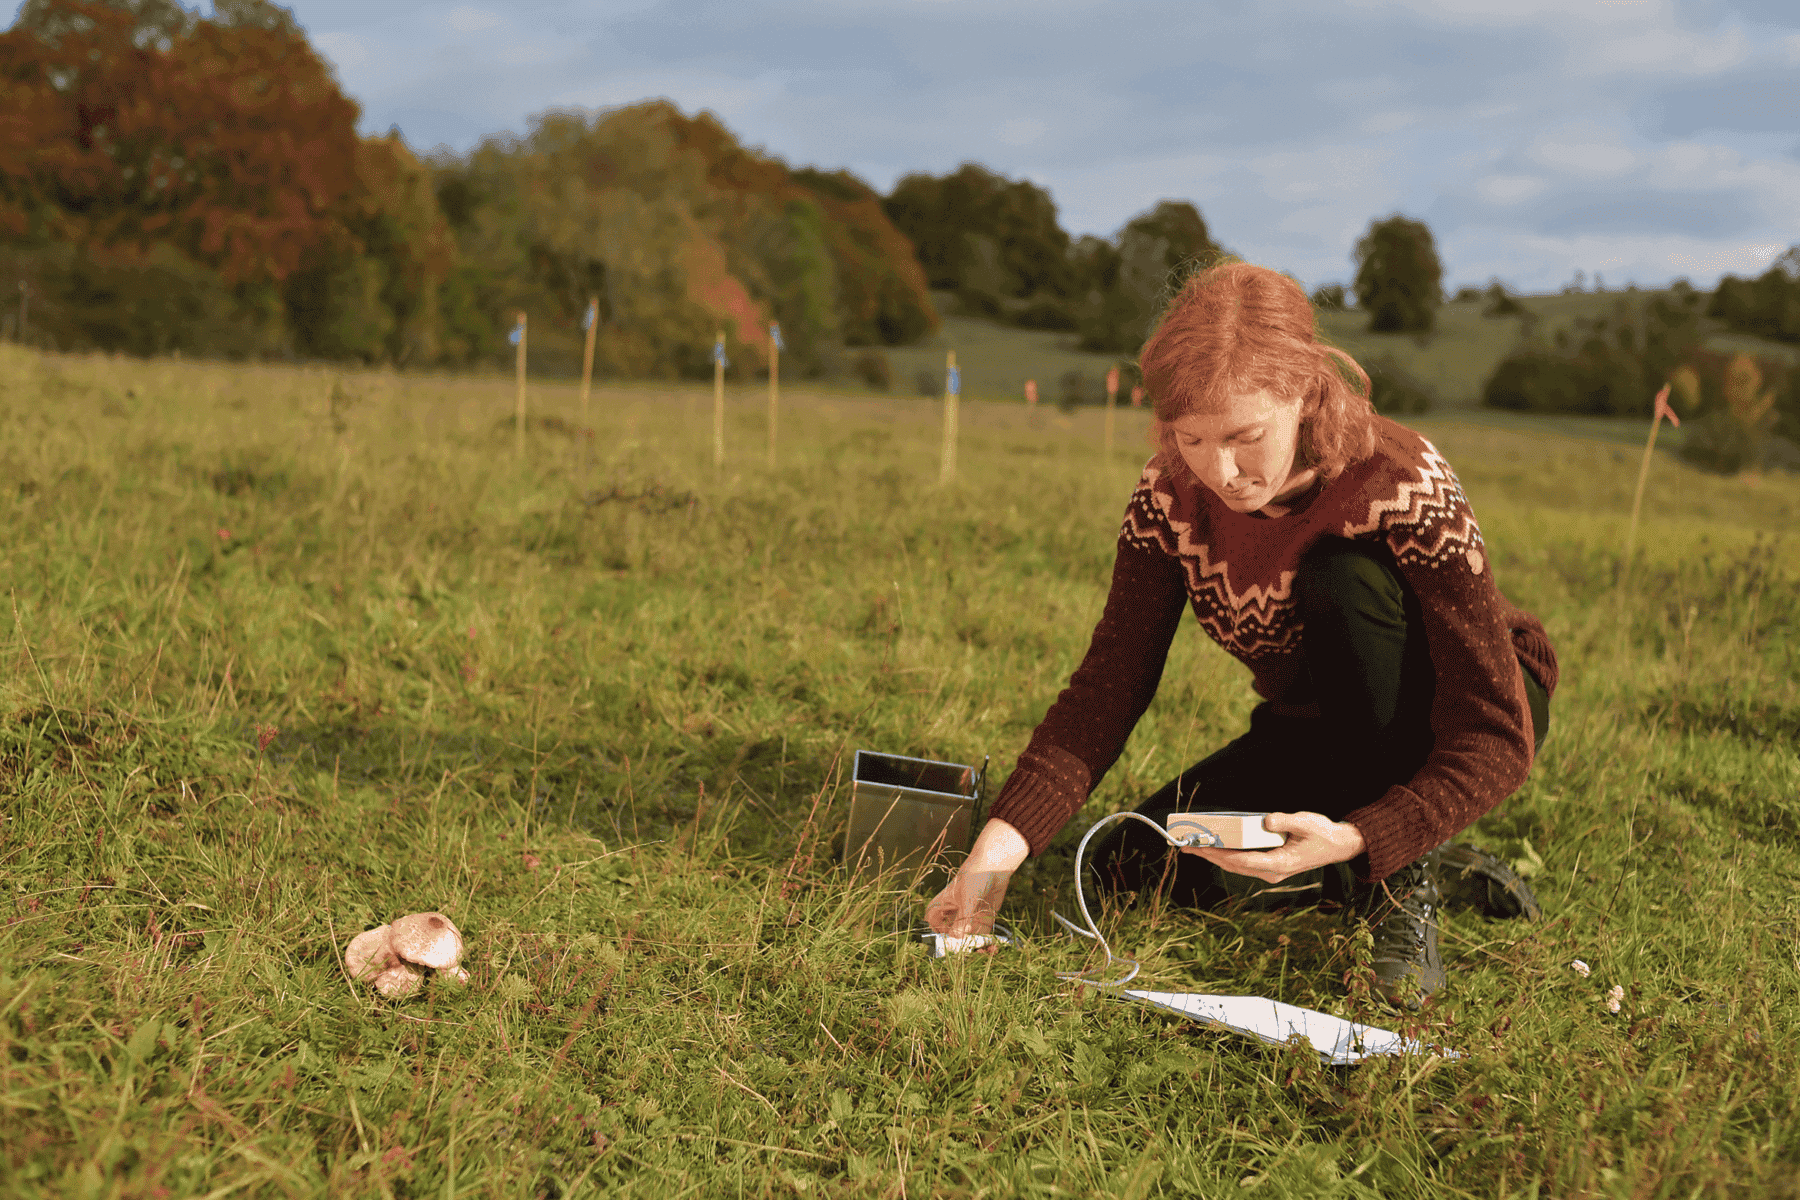 Picture: The photograph shows a young female scientist in a meadow in autumn, kneeling with one leg on the ground and taking a measurement. With her right hand she holds a small white sensor device to the ground. In her left hand she holds a rectangular white device from which she is reading something. In front of the woman lies a clipboard with a document in the grass. Next to her is a small square metal container. To her left grows a small group of mushrooms. Behind her are several marker sticks with small red and blue pennants stuck in the meadow soil. In the background is a hilly meadow landscape with groups of trees in autumn leaves.